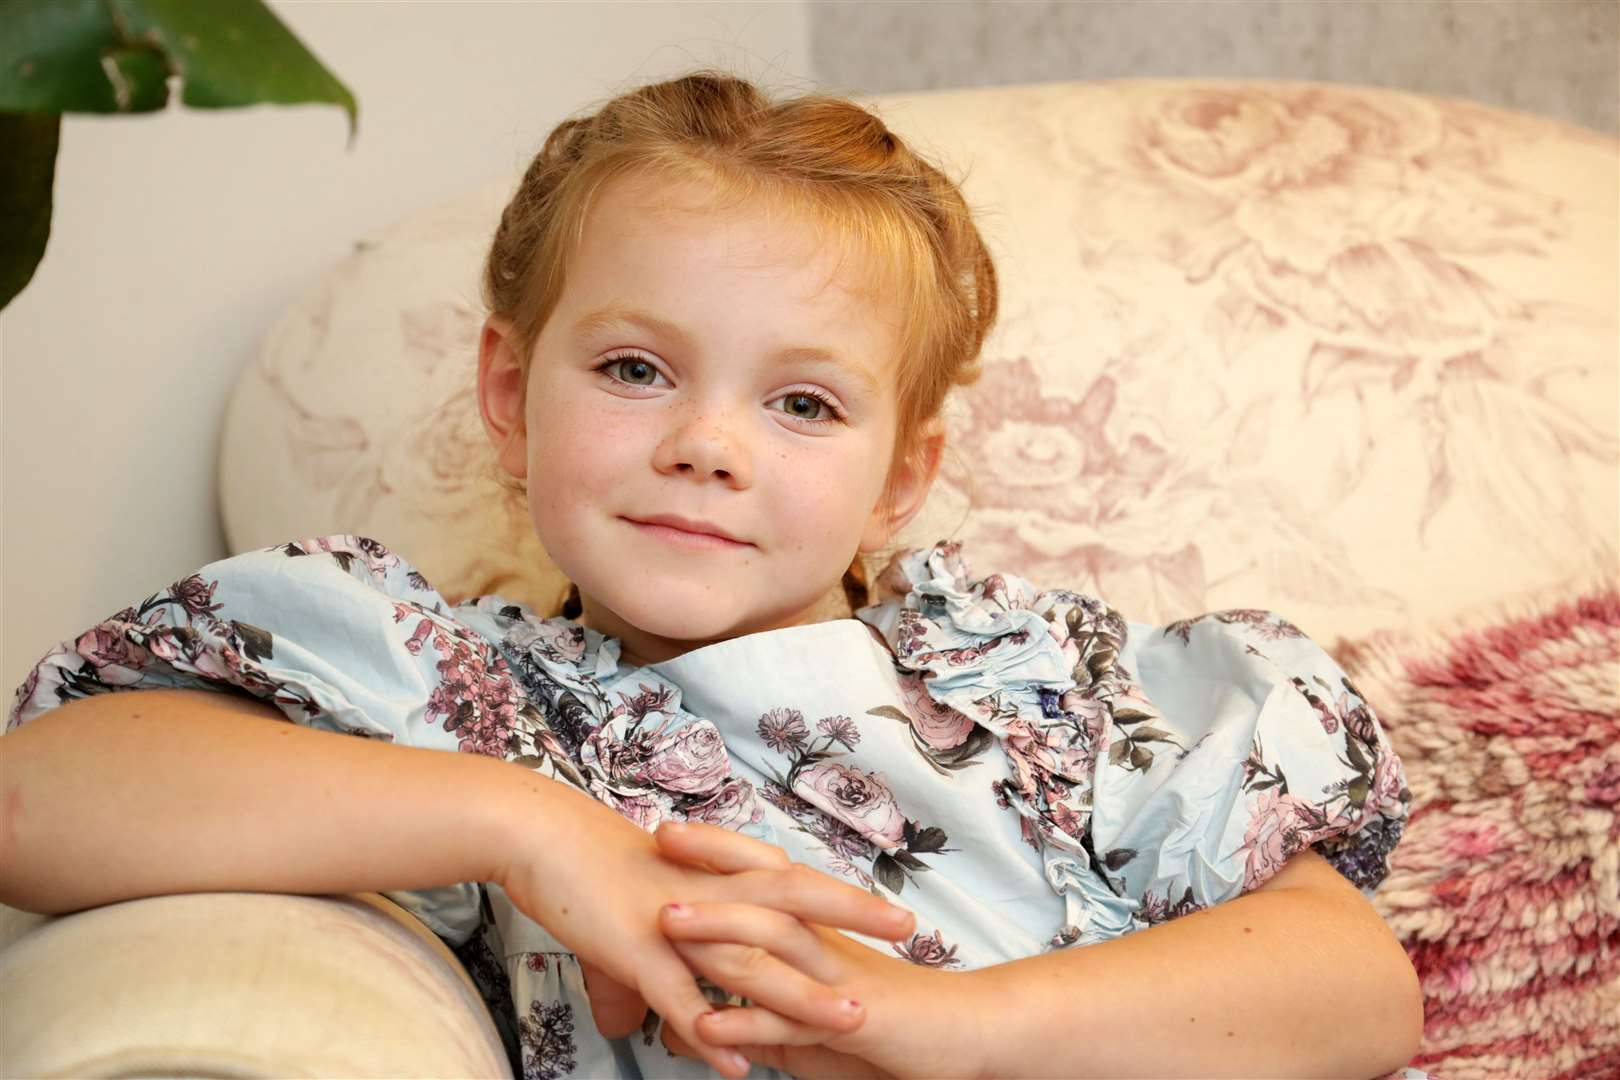 Darcey's cancer diagnosis came just four days after she was told she had a broken arm